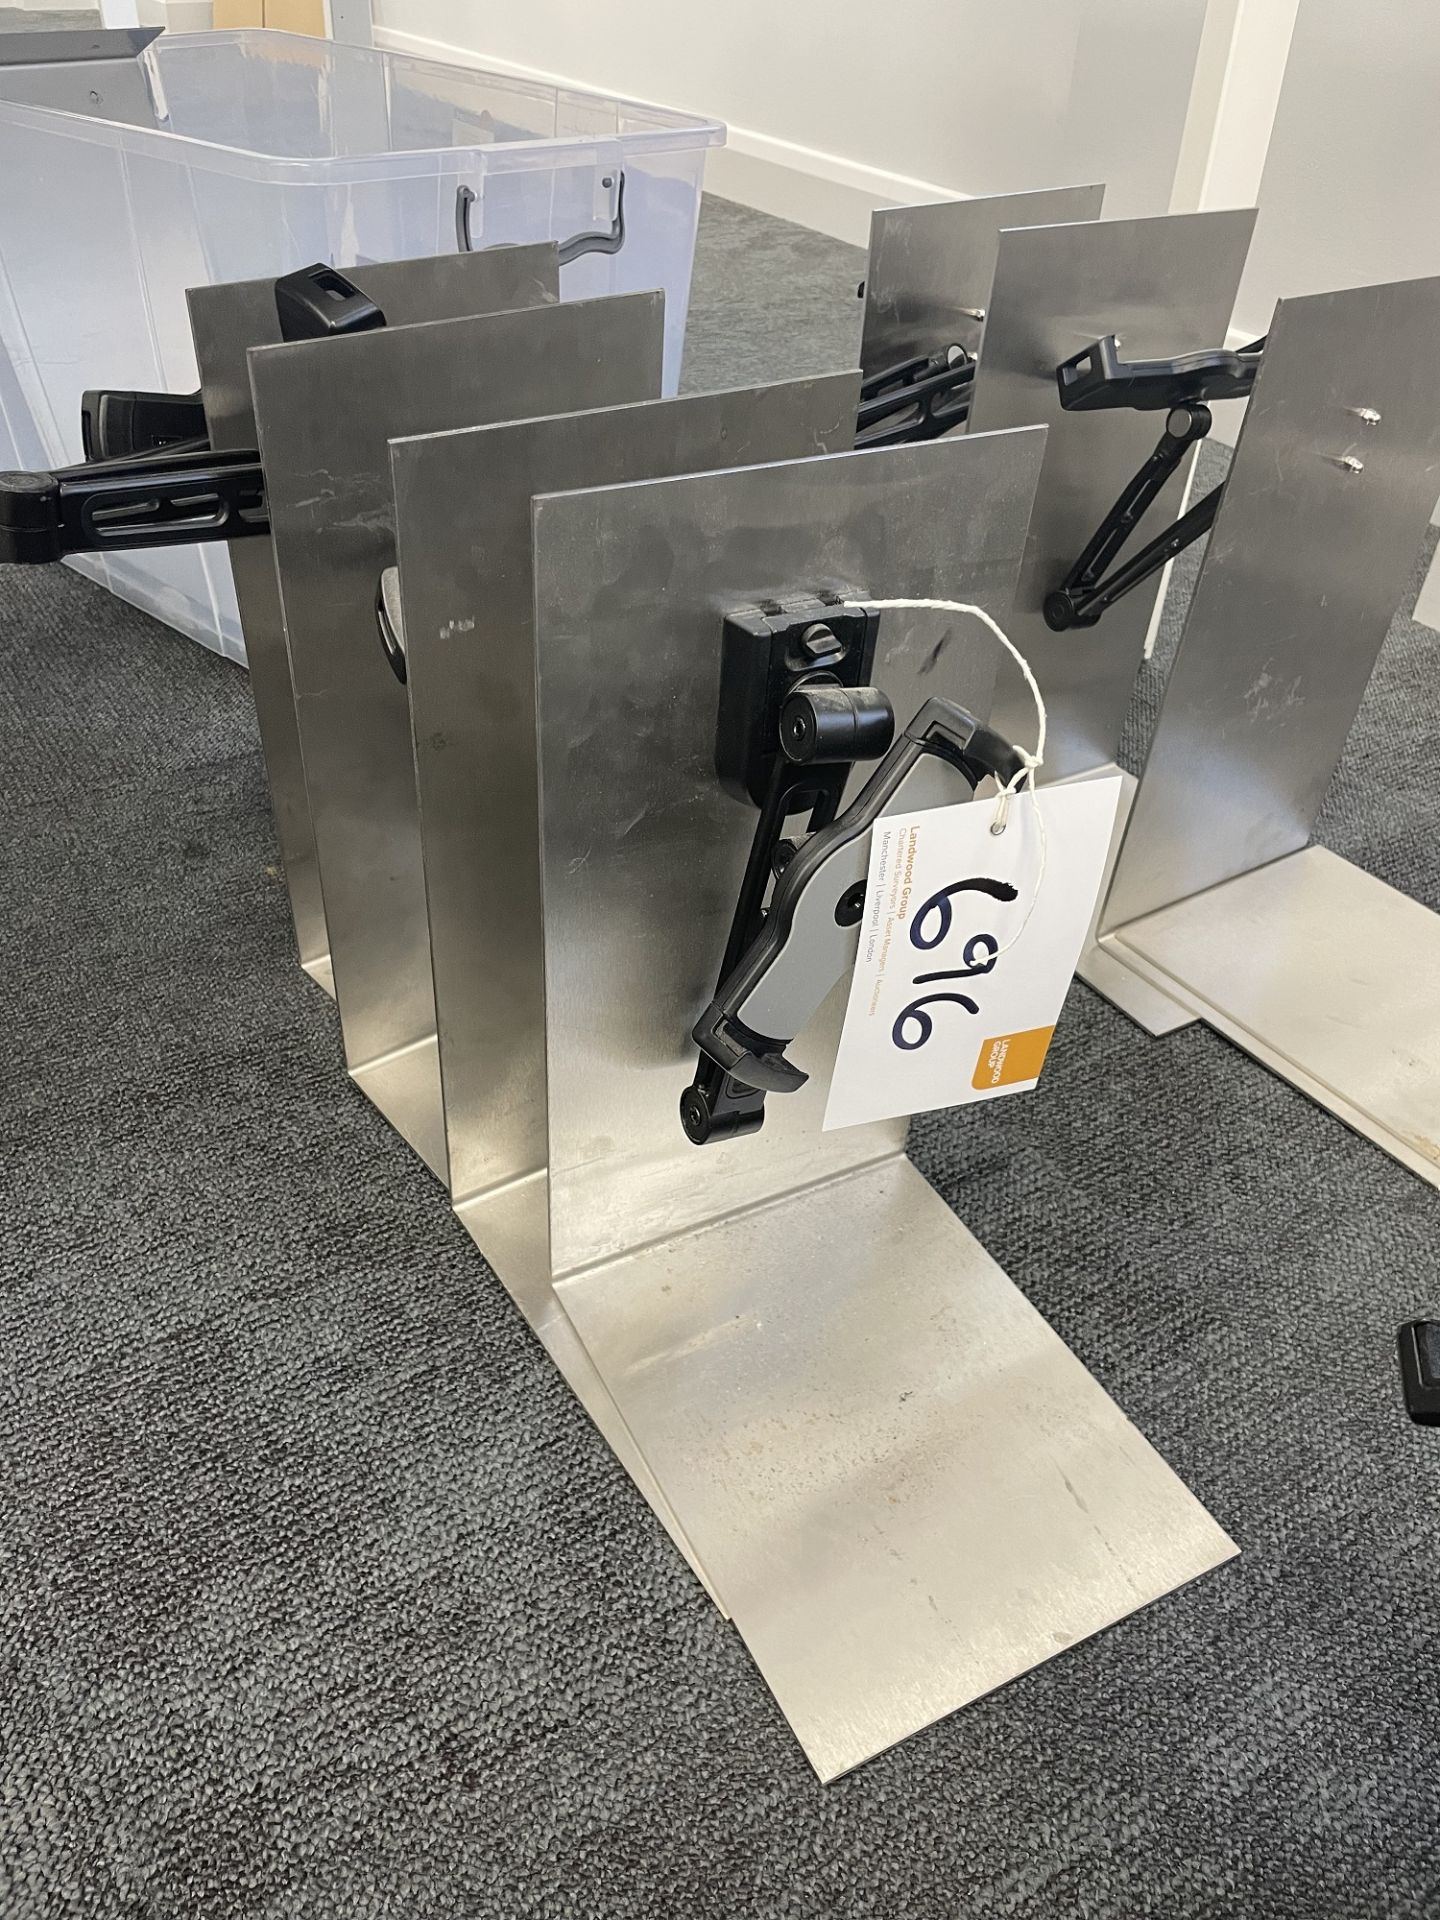 4 stainless steel tablet stands with tablet clamps.